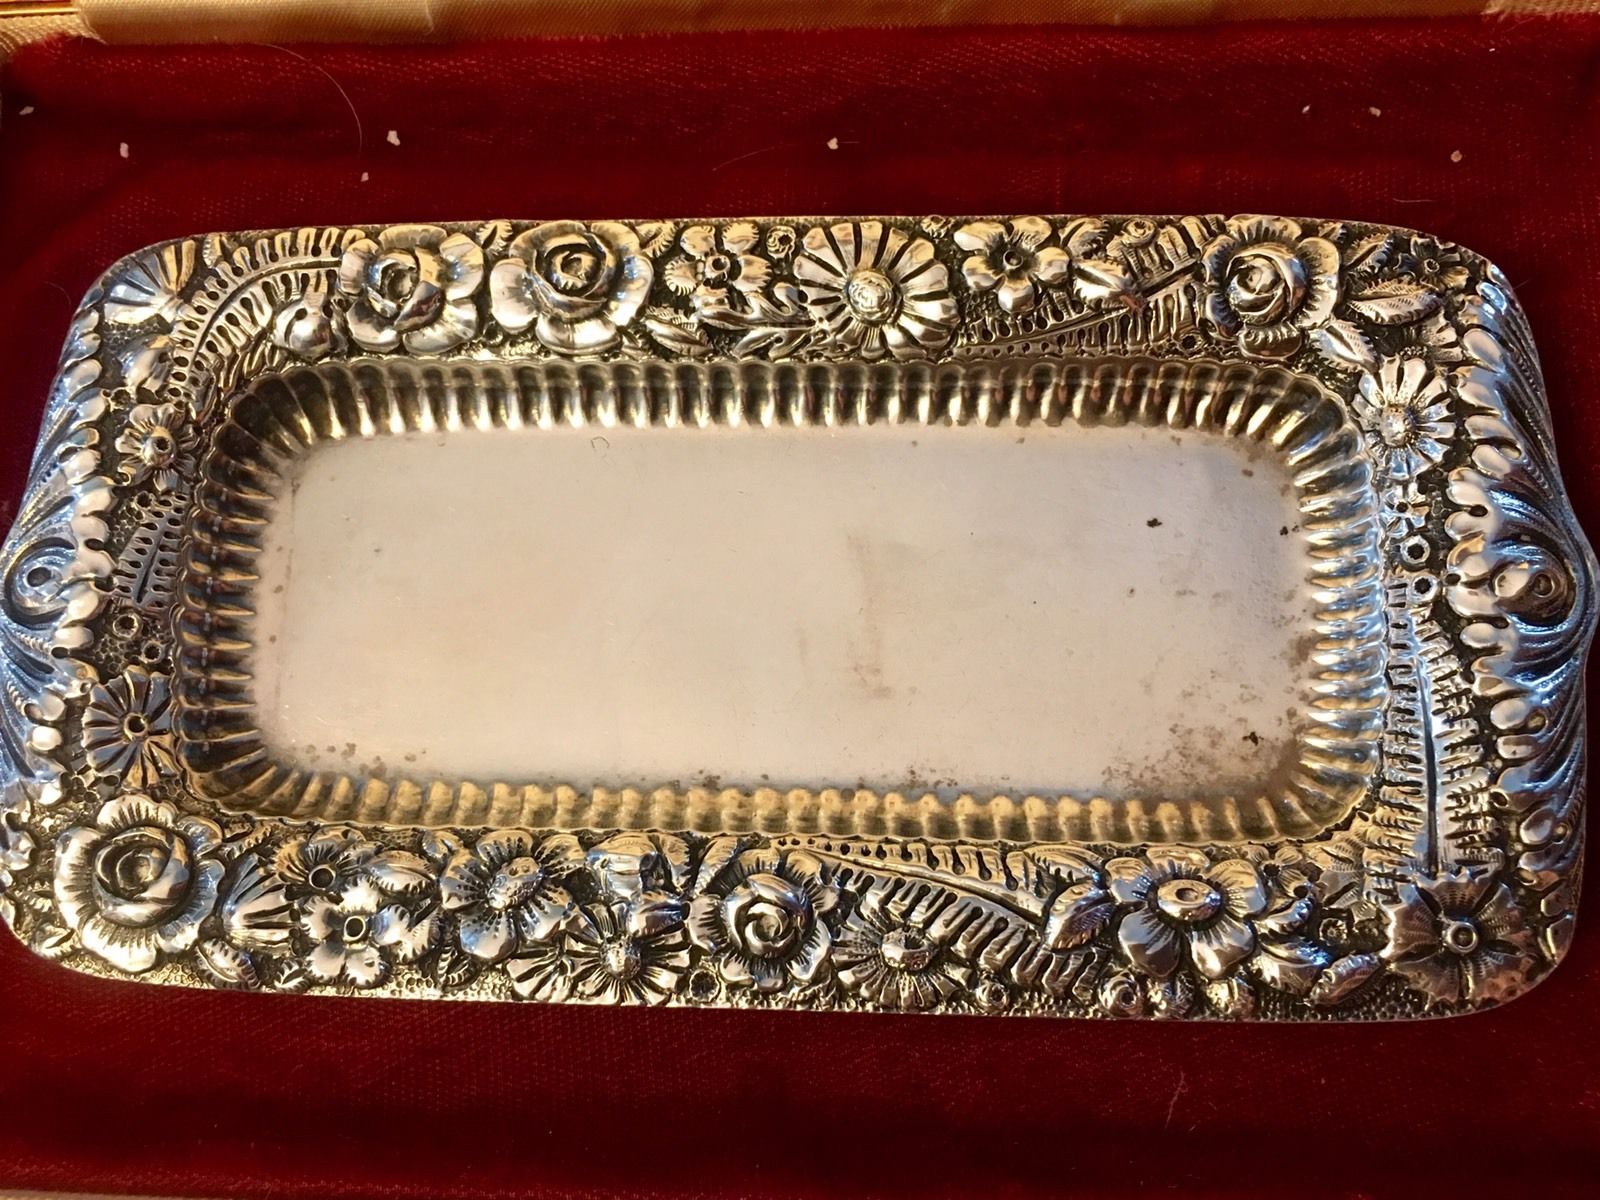 Tiffany & Co Antique REPOUSSE Sterling Silver FERN Trinket Vanity Pin Tray c1885